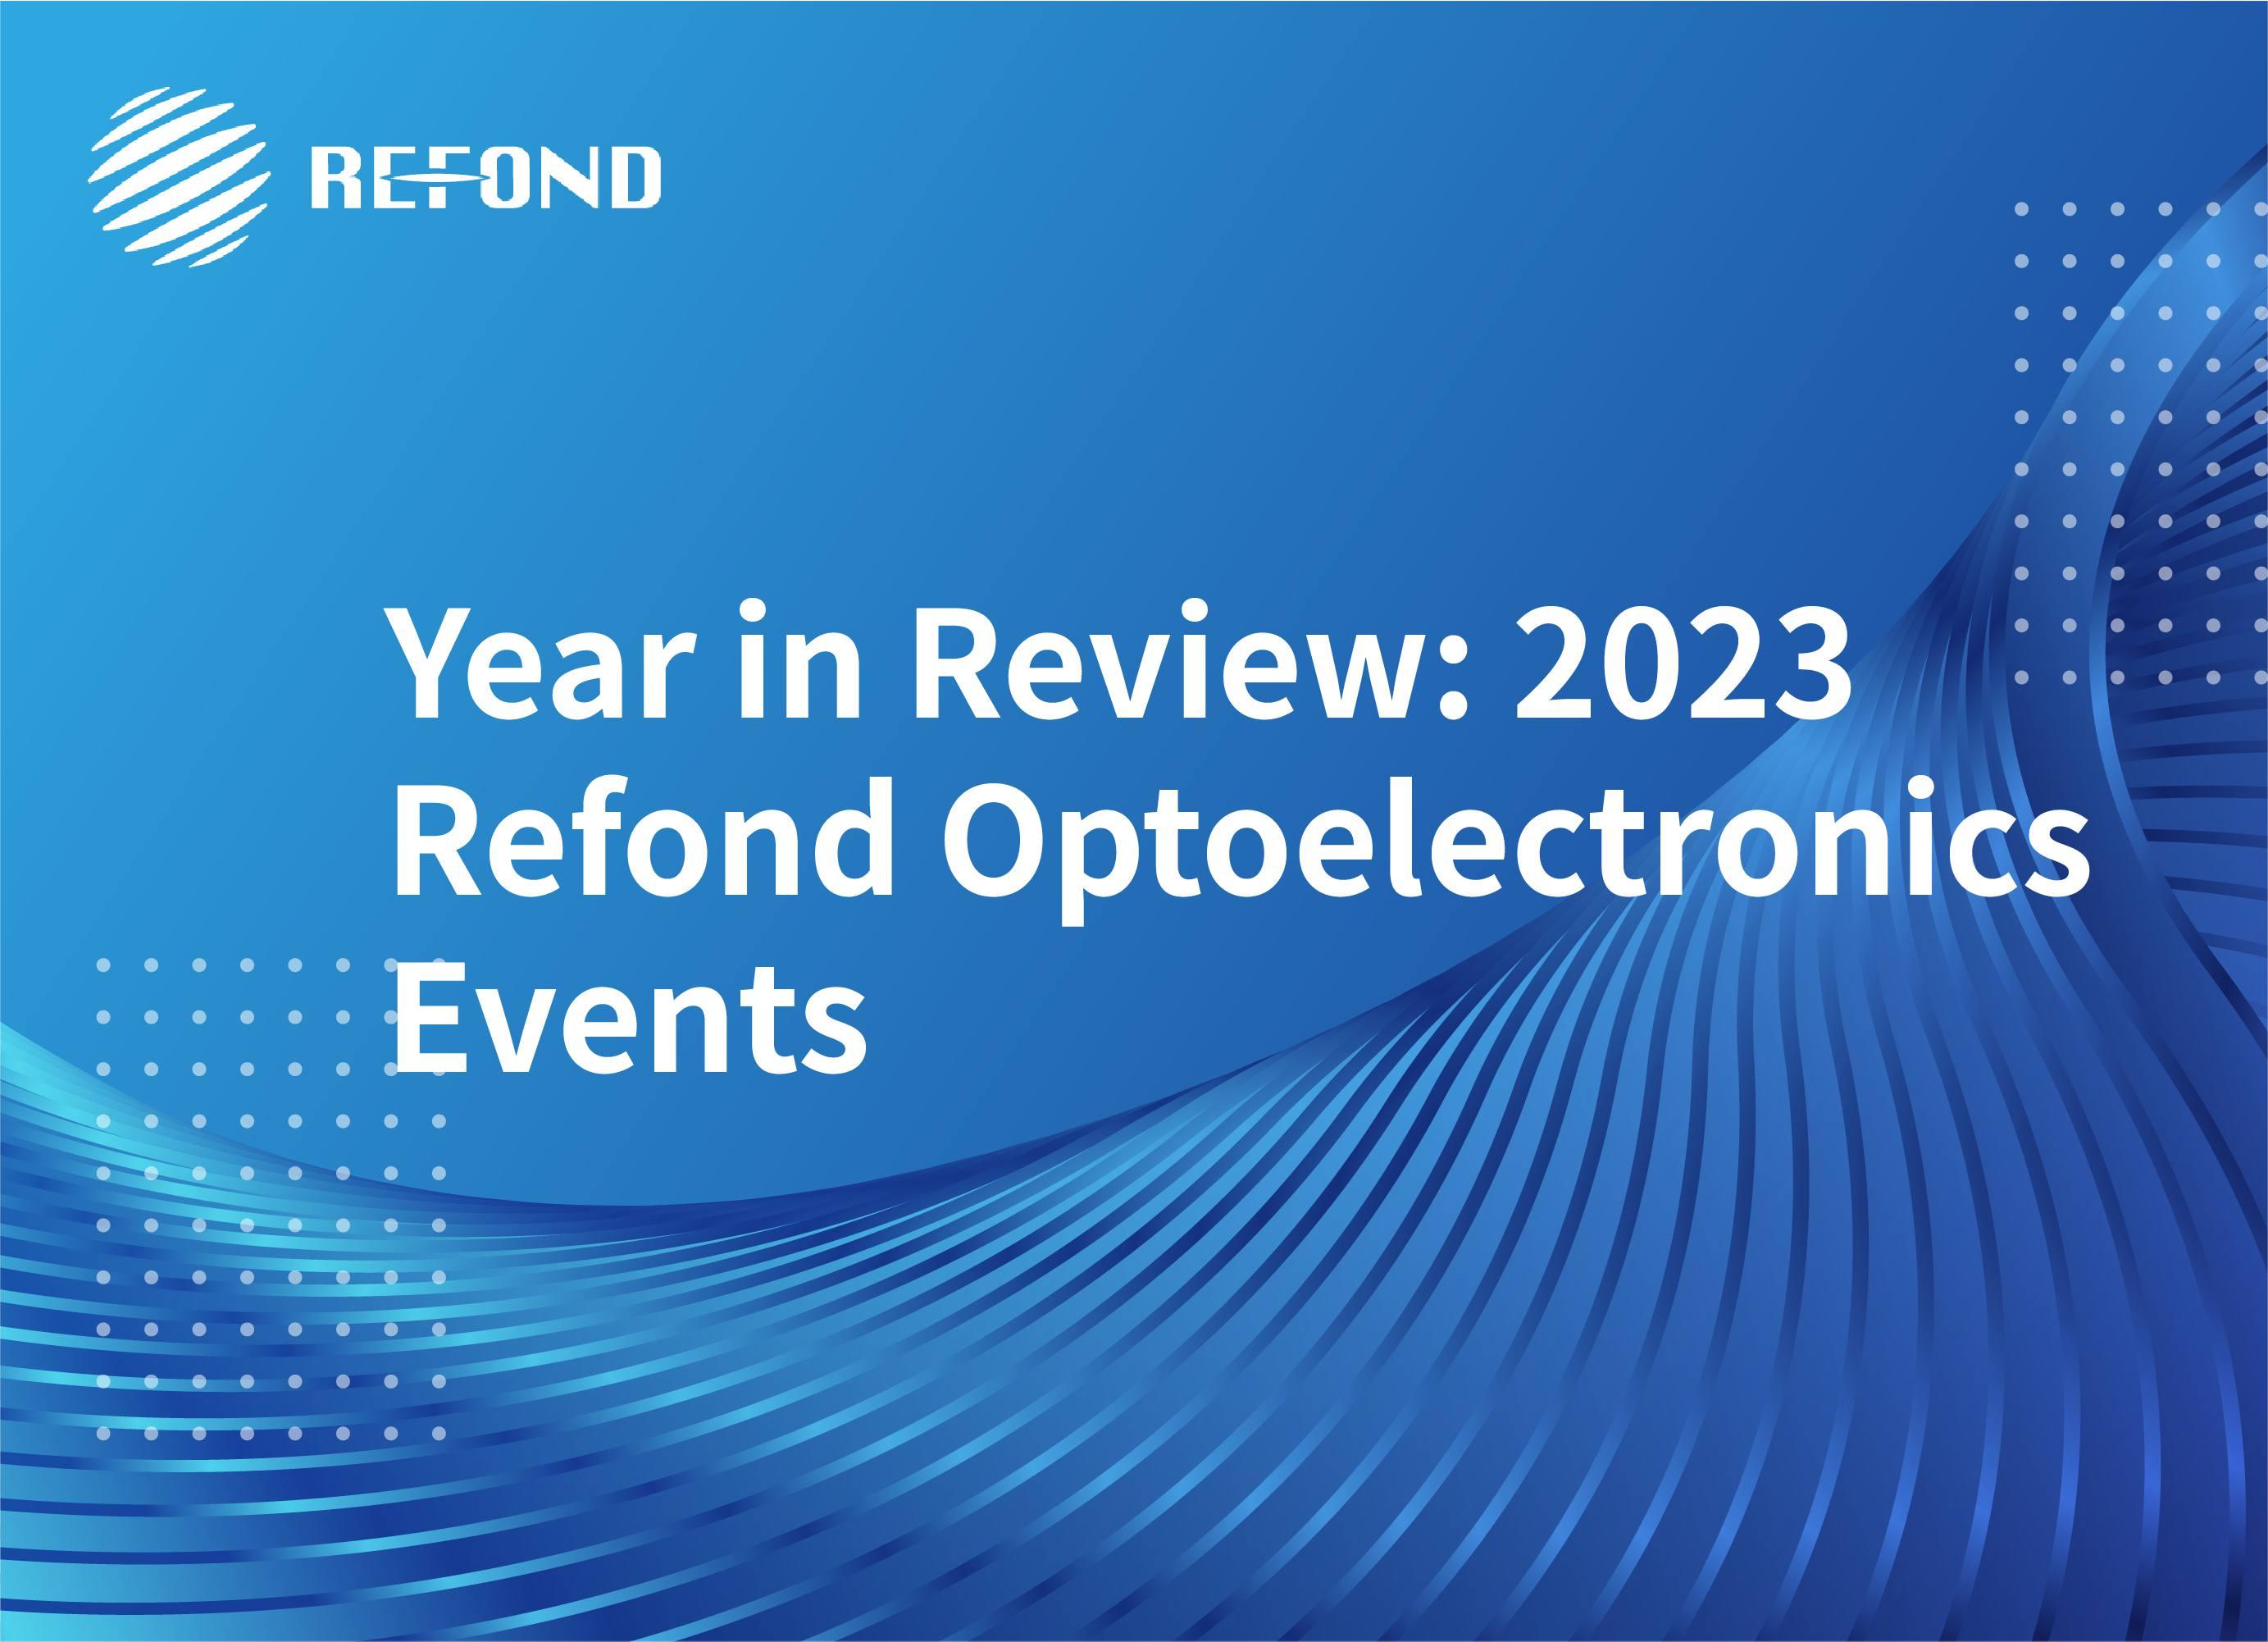 Year-end Special 2023 | Refond Optoelectronics: Technology Innovation Leading a New Journey